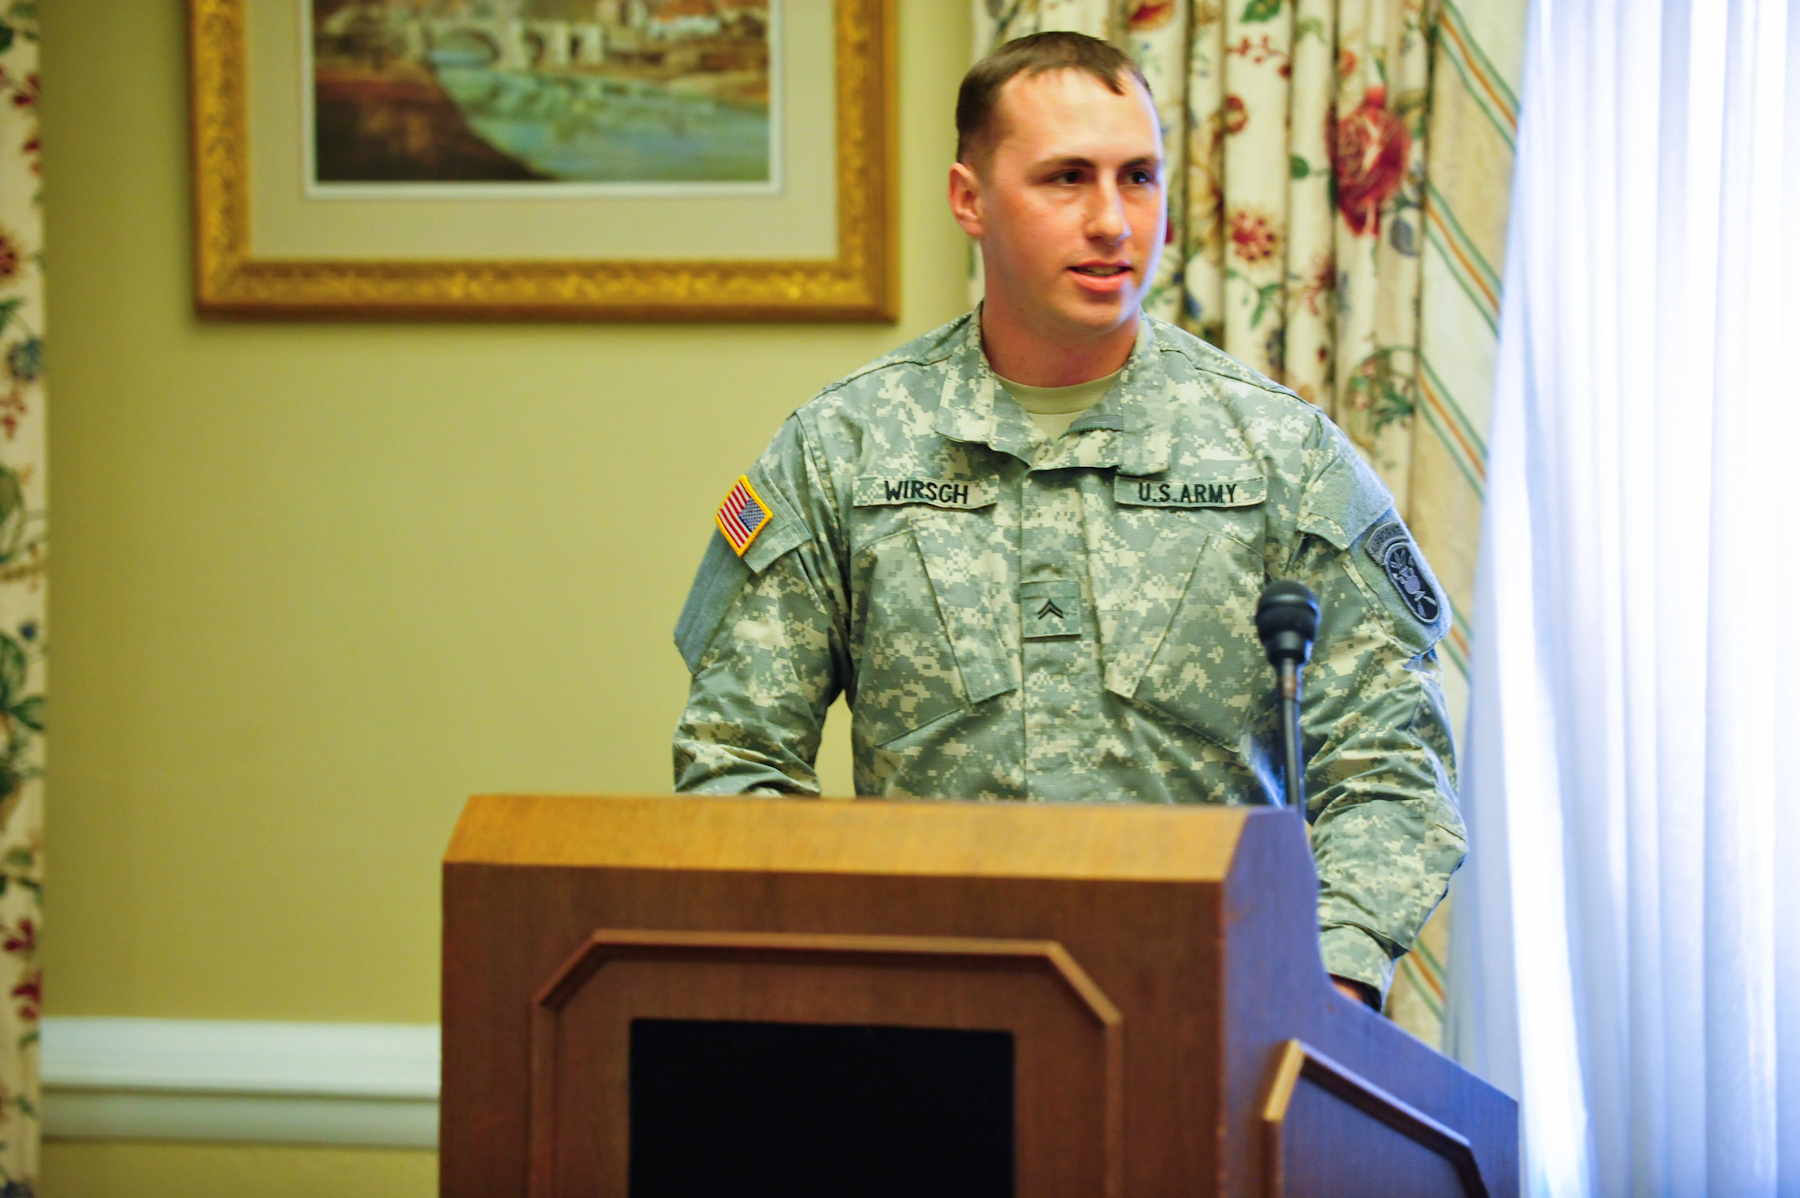 soldier speaking in front of two people in the room